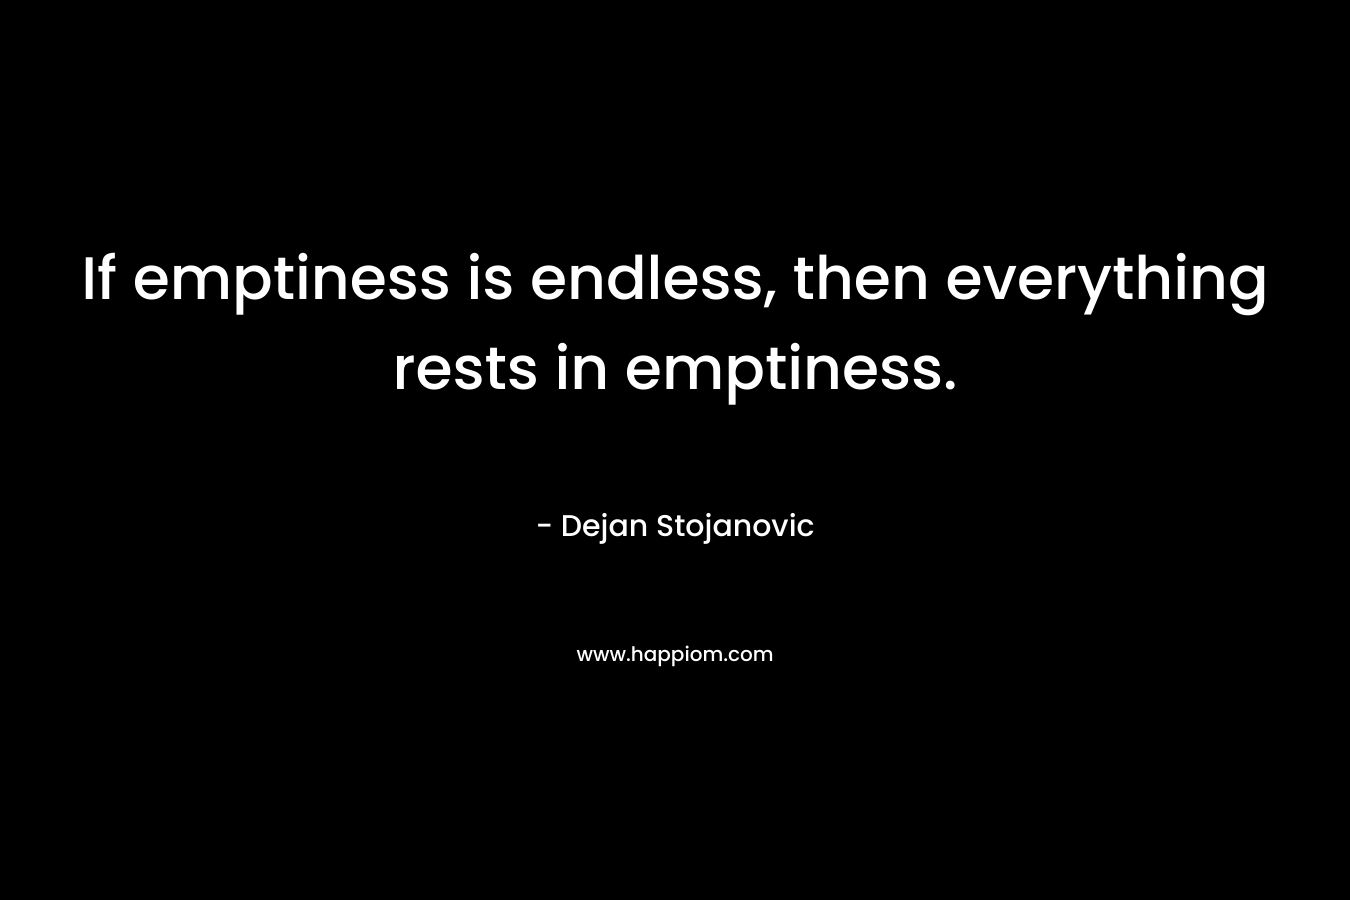 If emptiness is endless, then everything rests in emptiness.